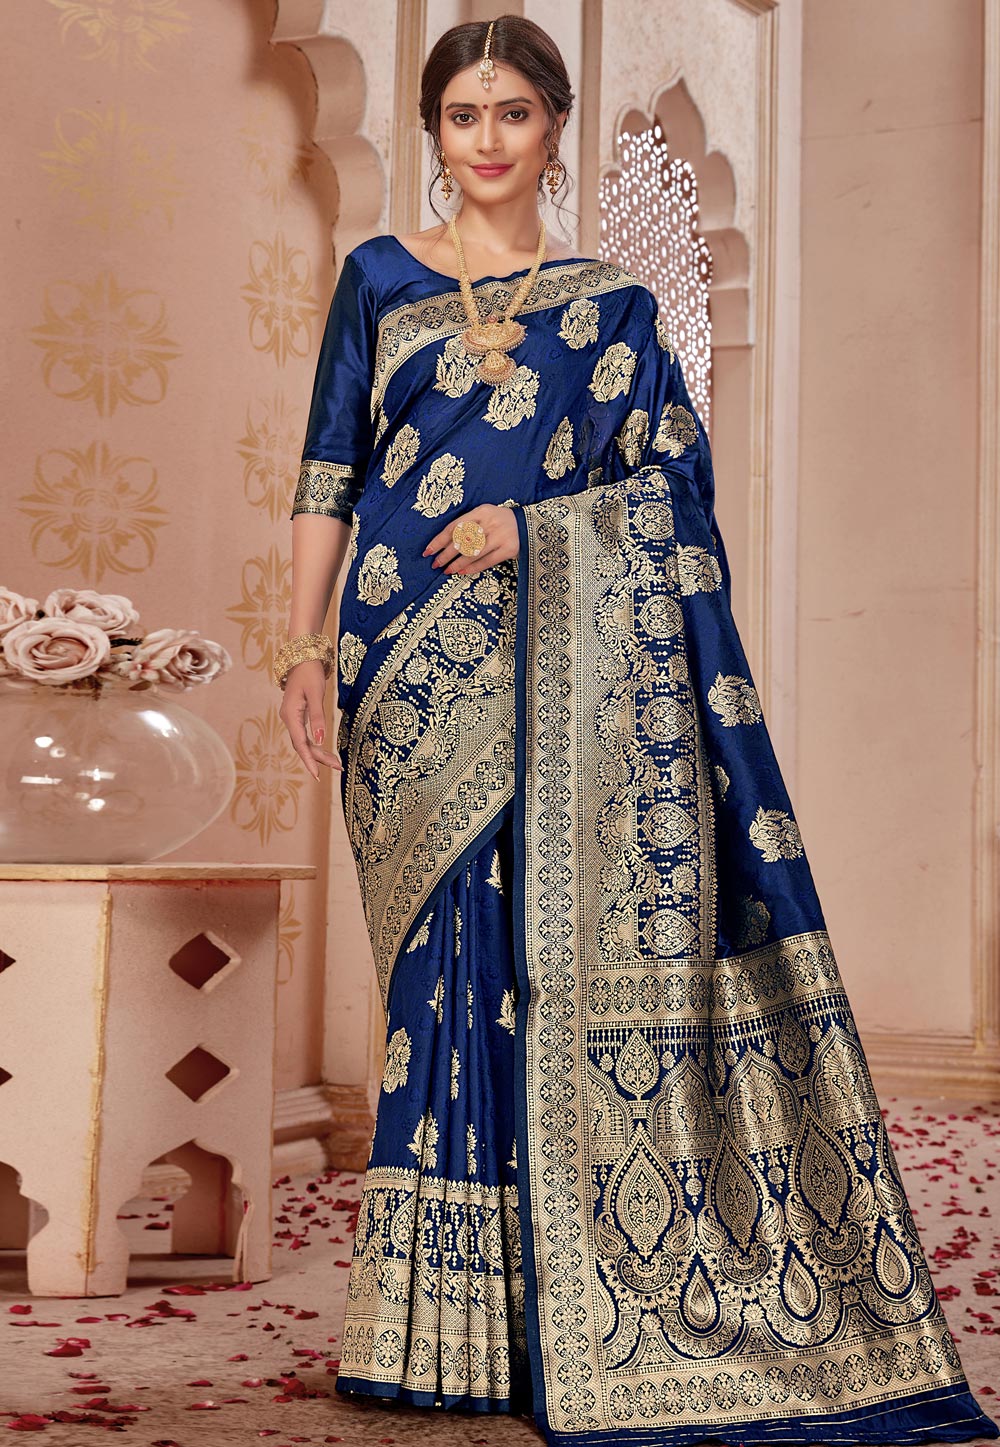 Sarees with Quarter Sleeve Blouse Online at